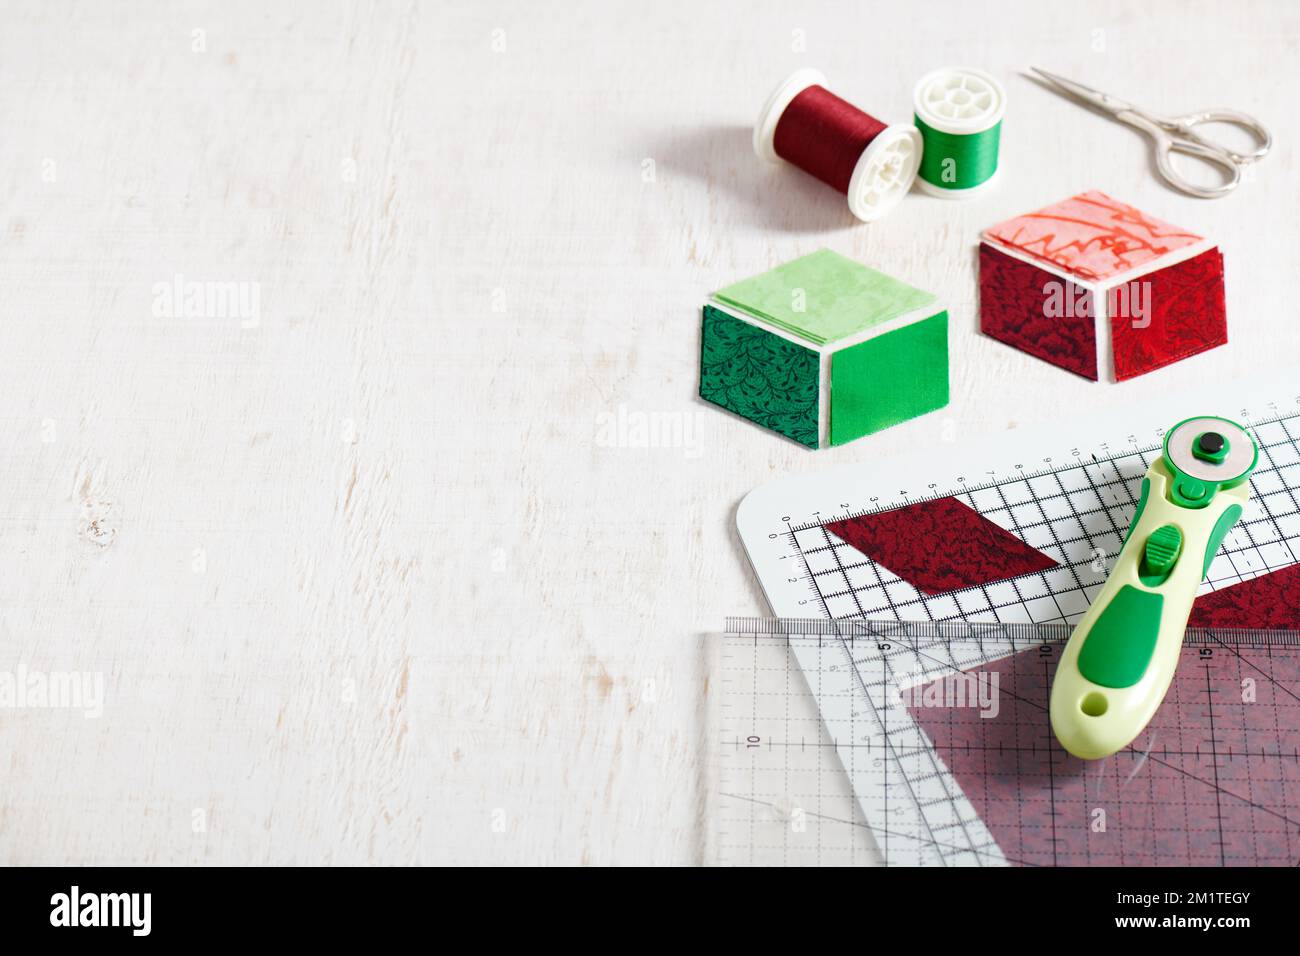 Small quilt, cutting mat and sewing and quilting accessories Stock Photo -  Alamy